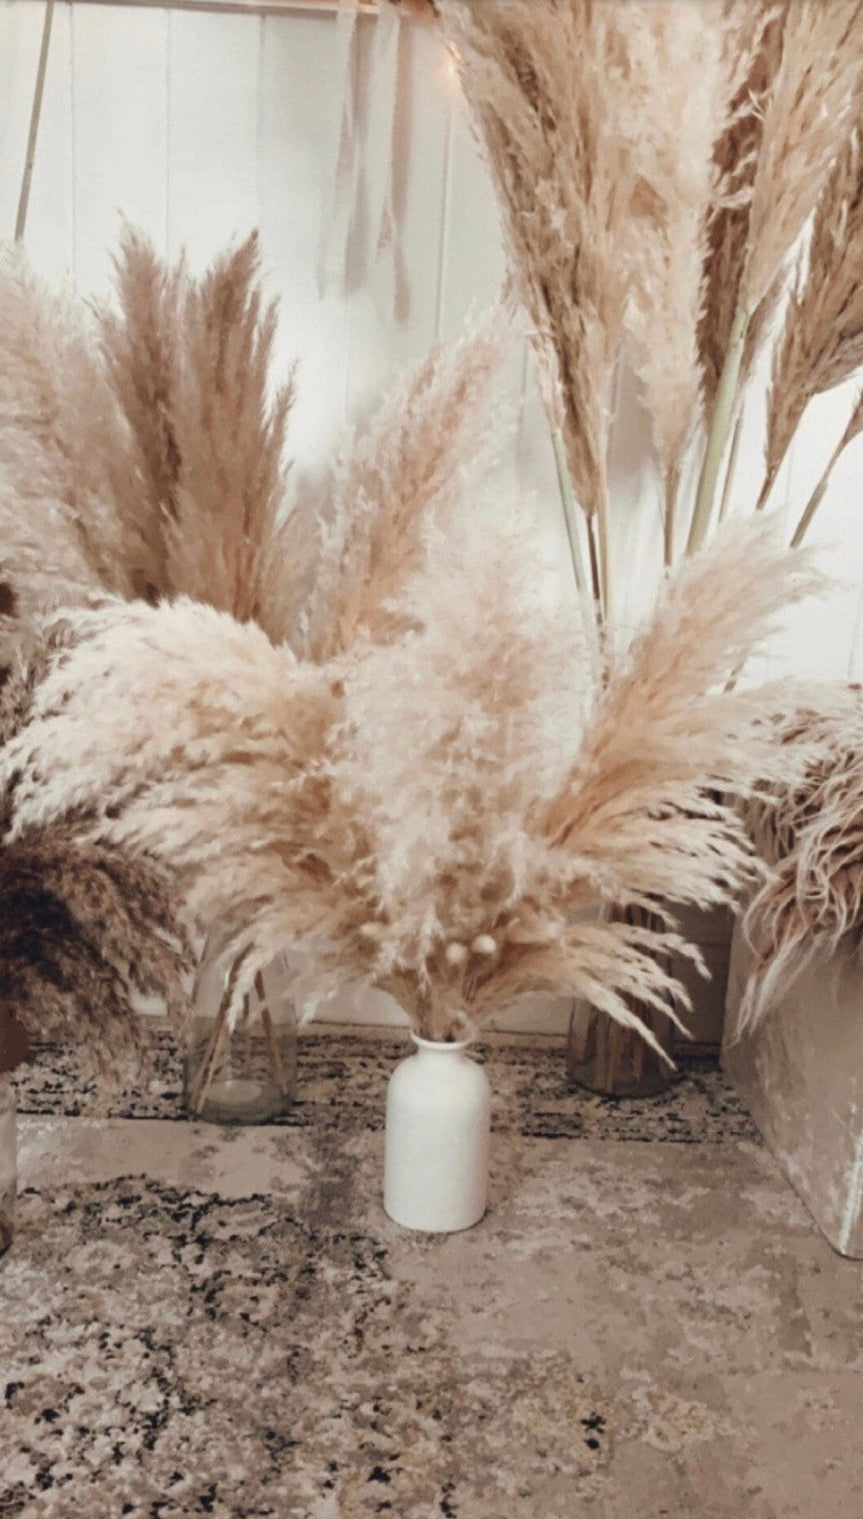 Sale extra large cream fluffy natural pampas grass 60-140cm pampas stem, gift for her, dried flowers, pampass grass / pampas bouquet